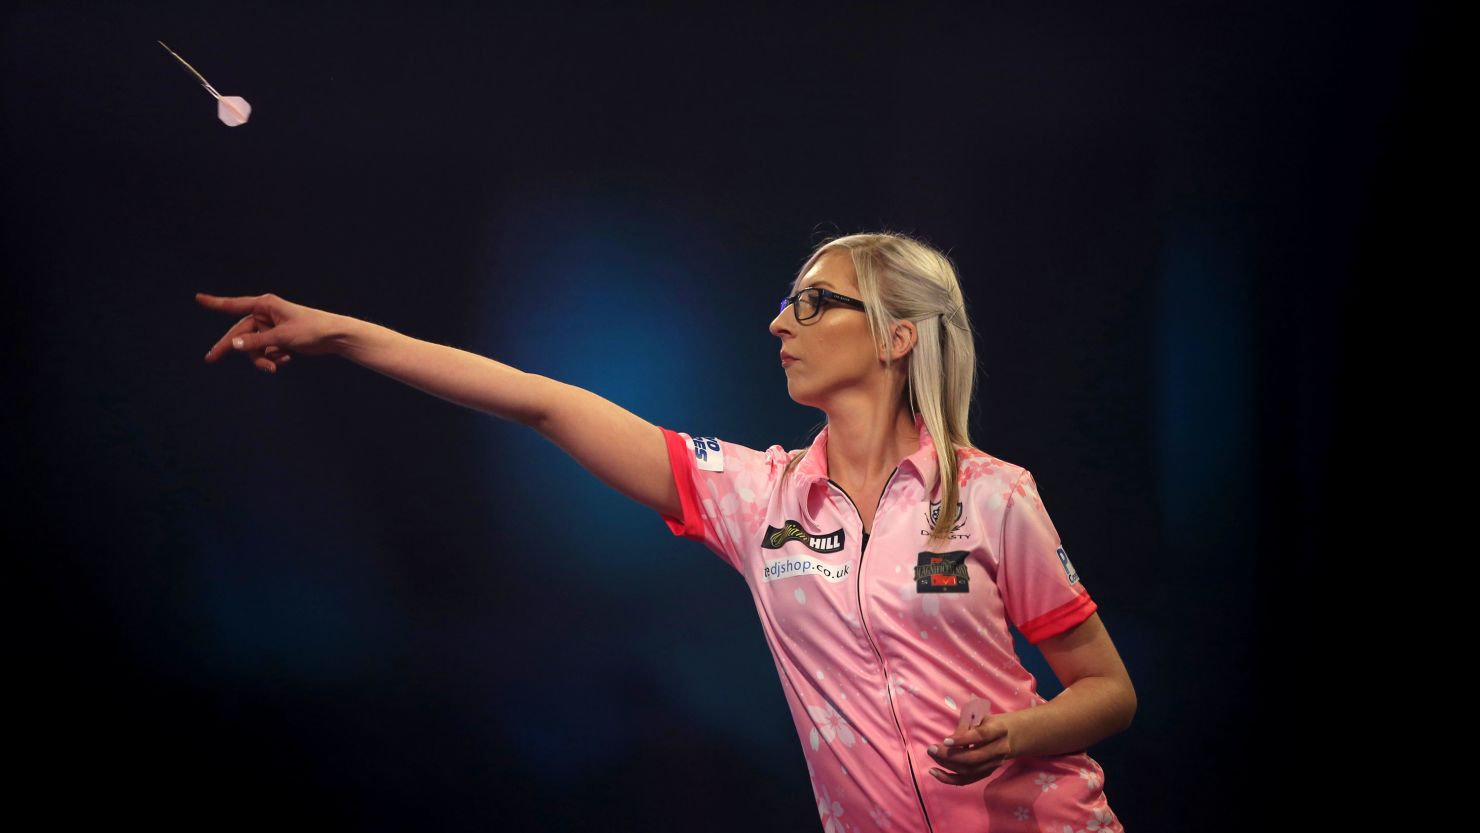 Fallon Sherrock made history when she beat Ted Evetts in a World Darts Championship match on Tuesday.